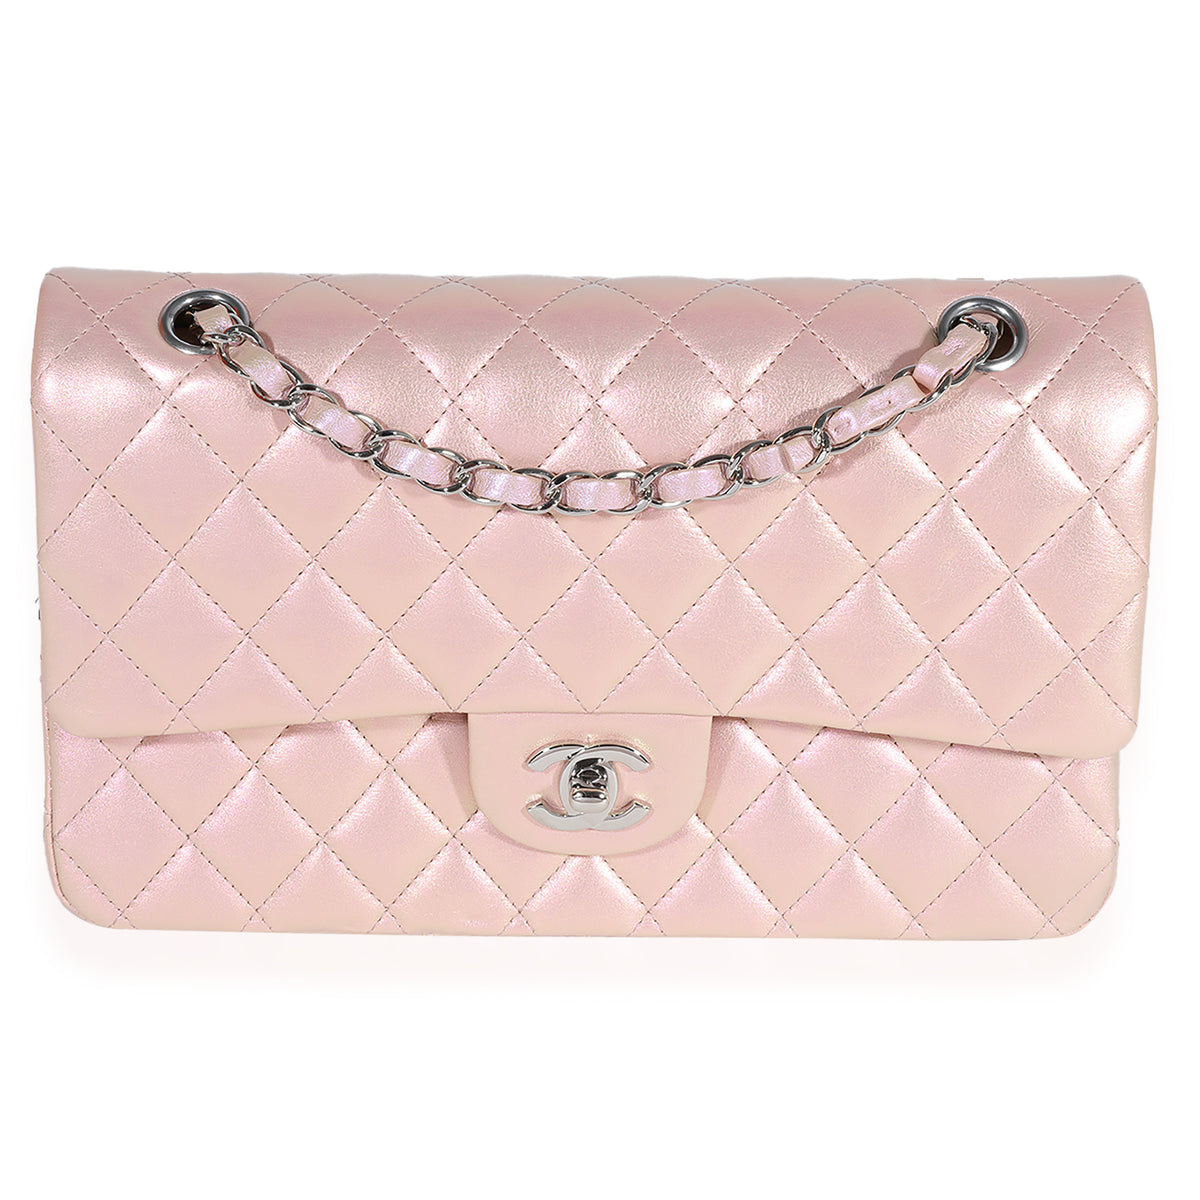 Chanel Pink Quilted Lambskin Medium Classic Double Flap Bag, myGemma